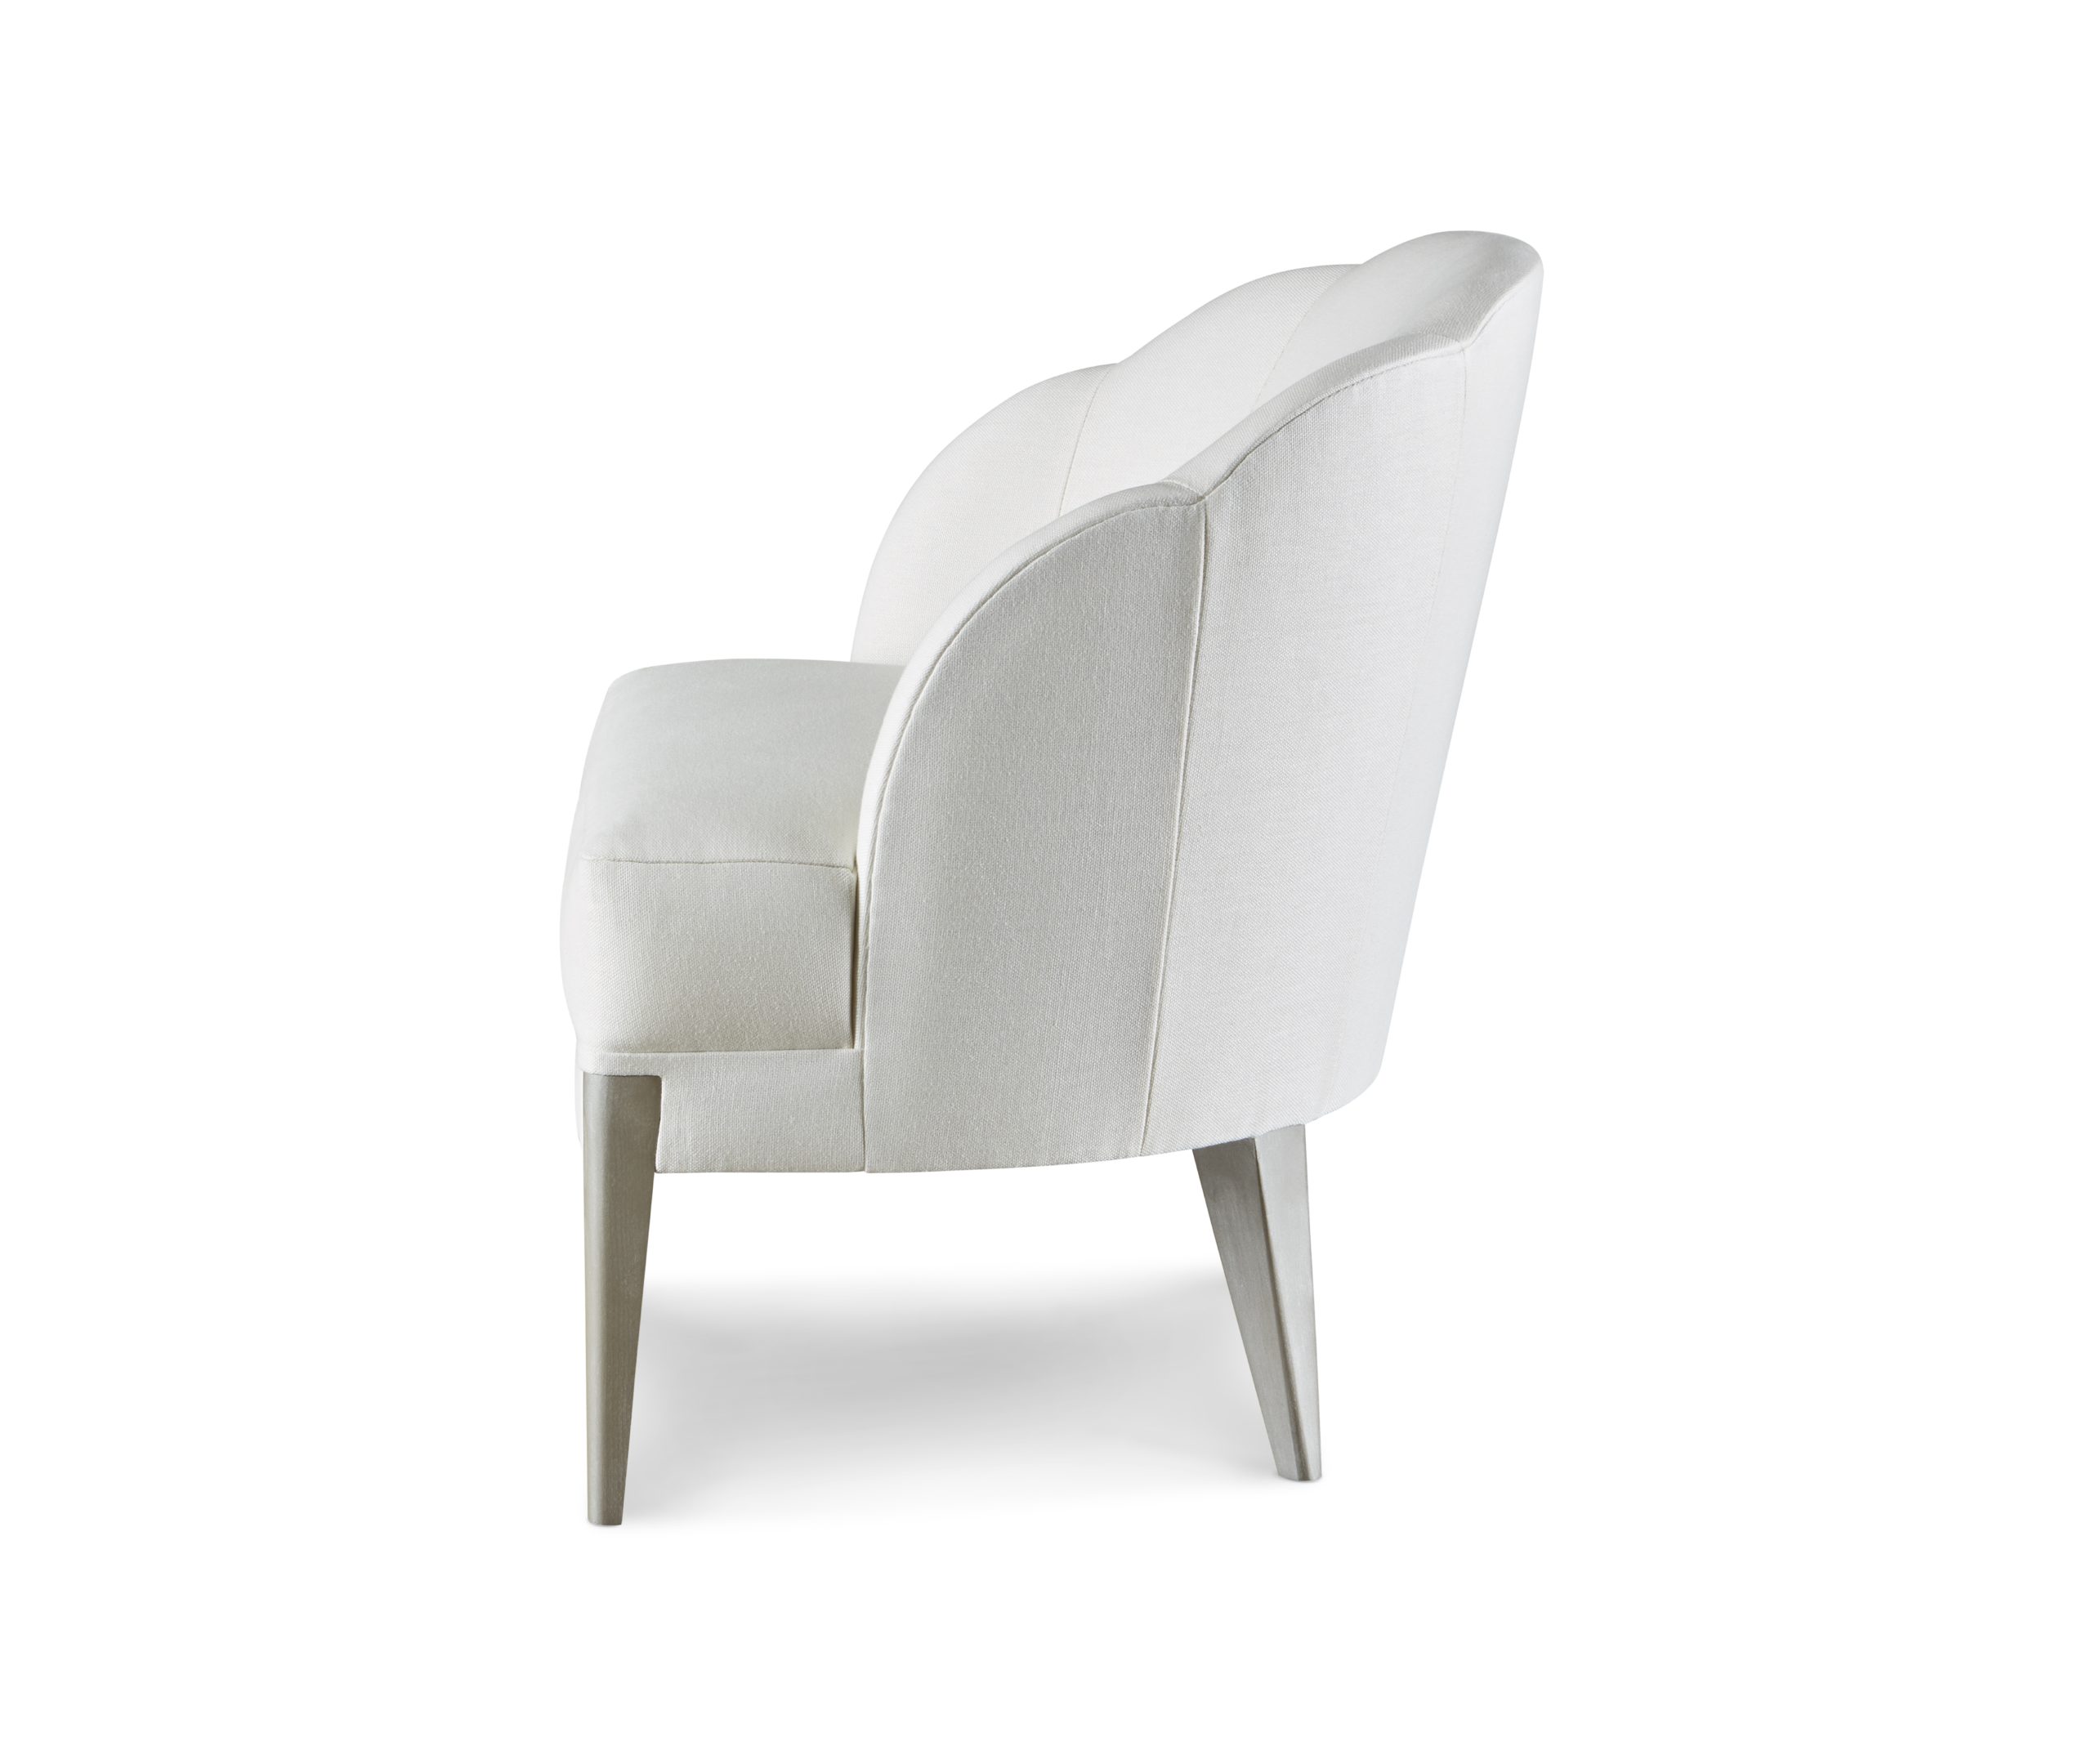 Baker_products_WNWN_sophie_chair_BAU3306c_SIDE-2-scaled-1